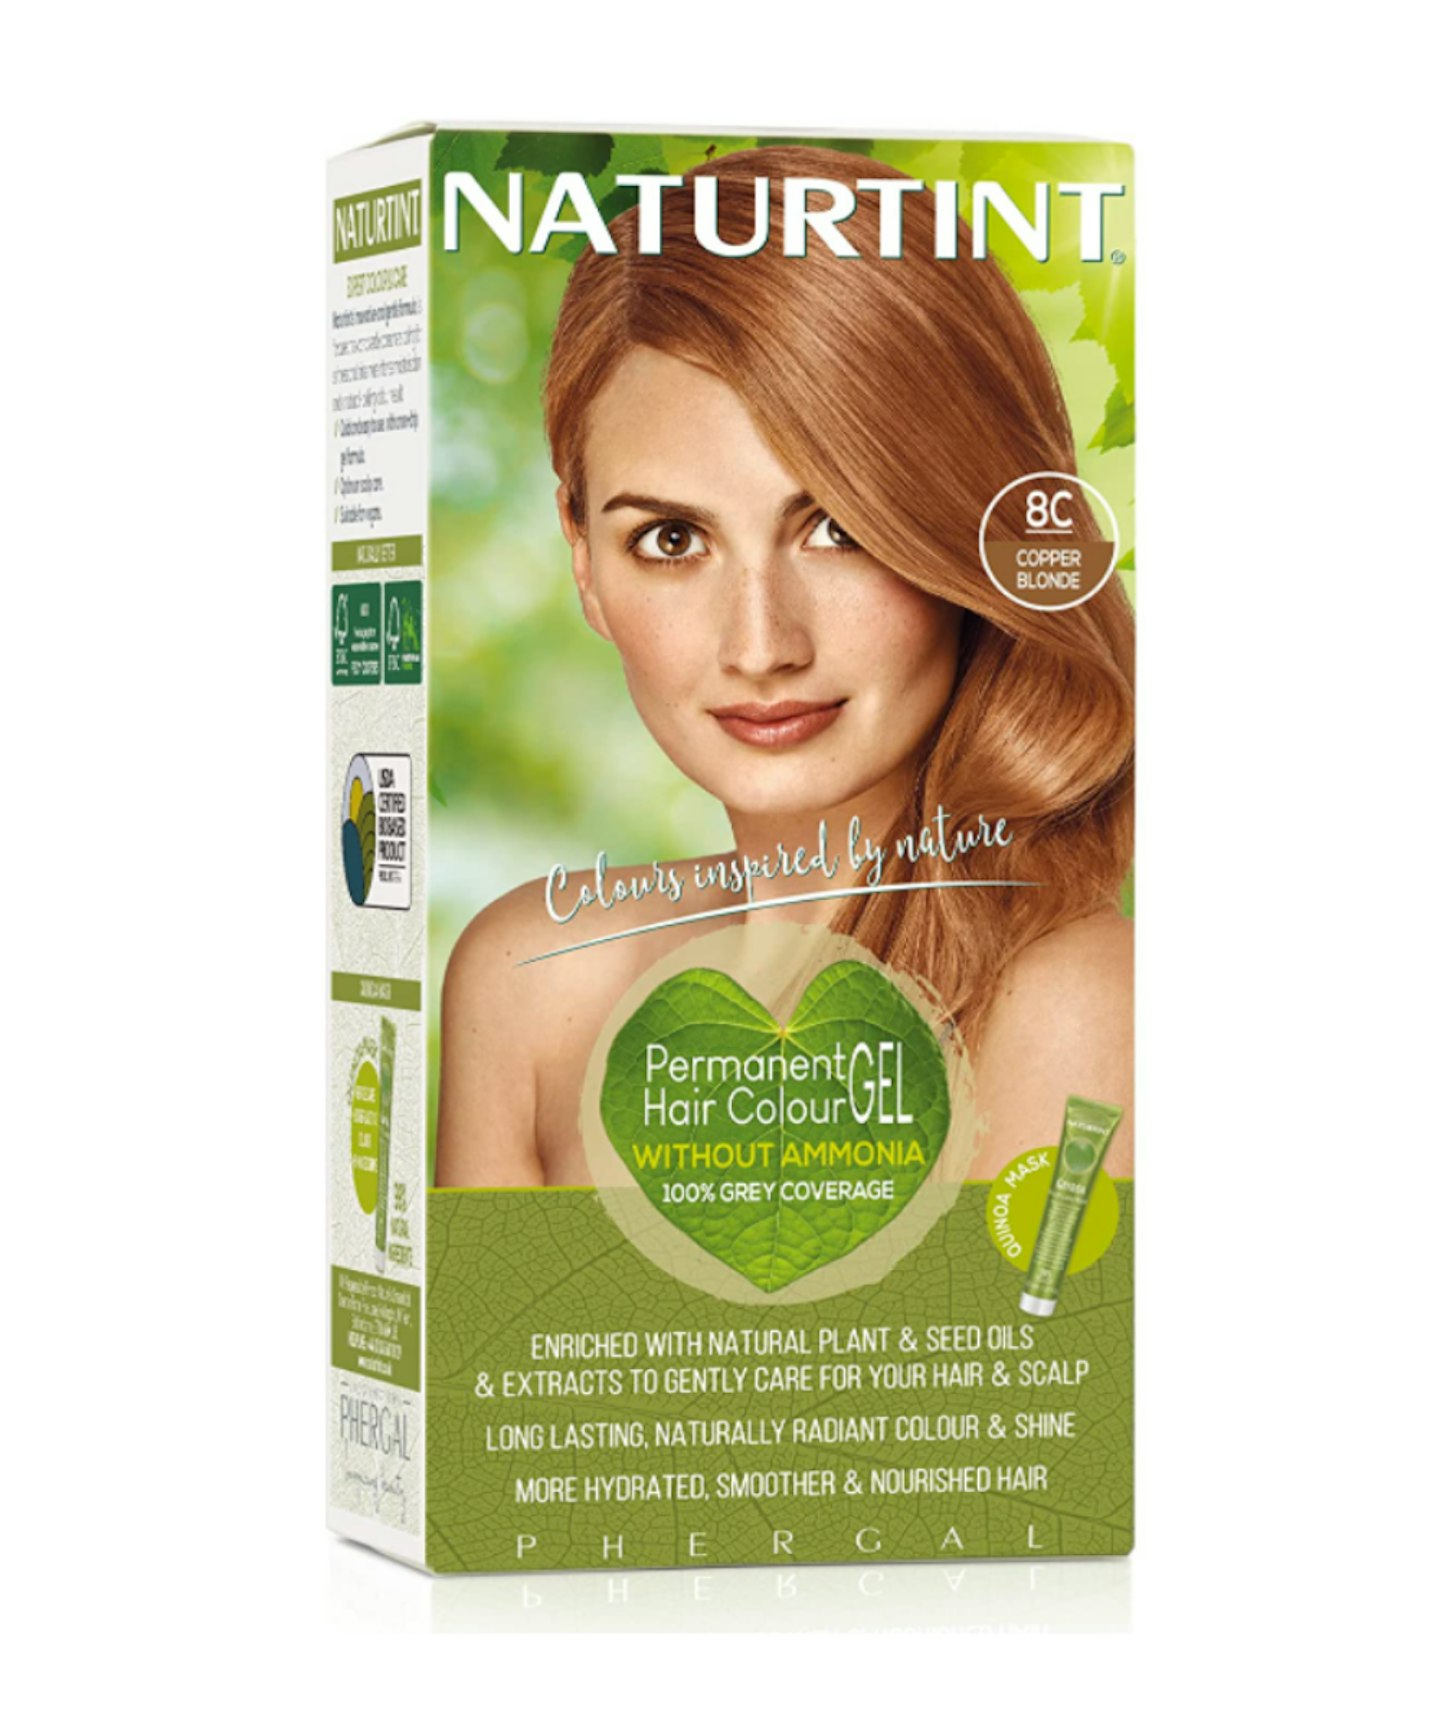 Naturtint 8C Copper Blonde Hair Color, 5.6 Ounce